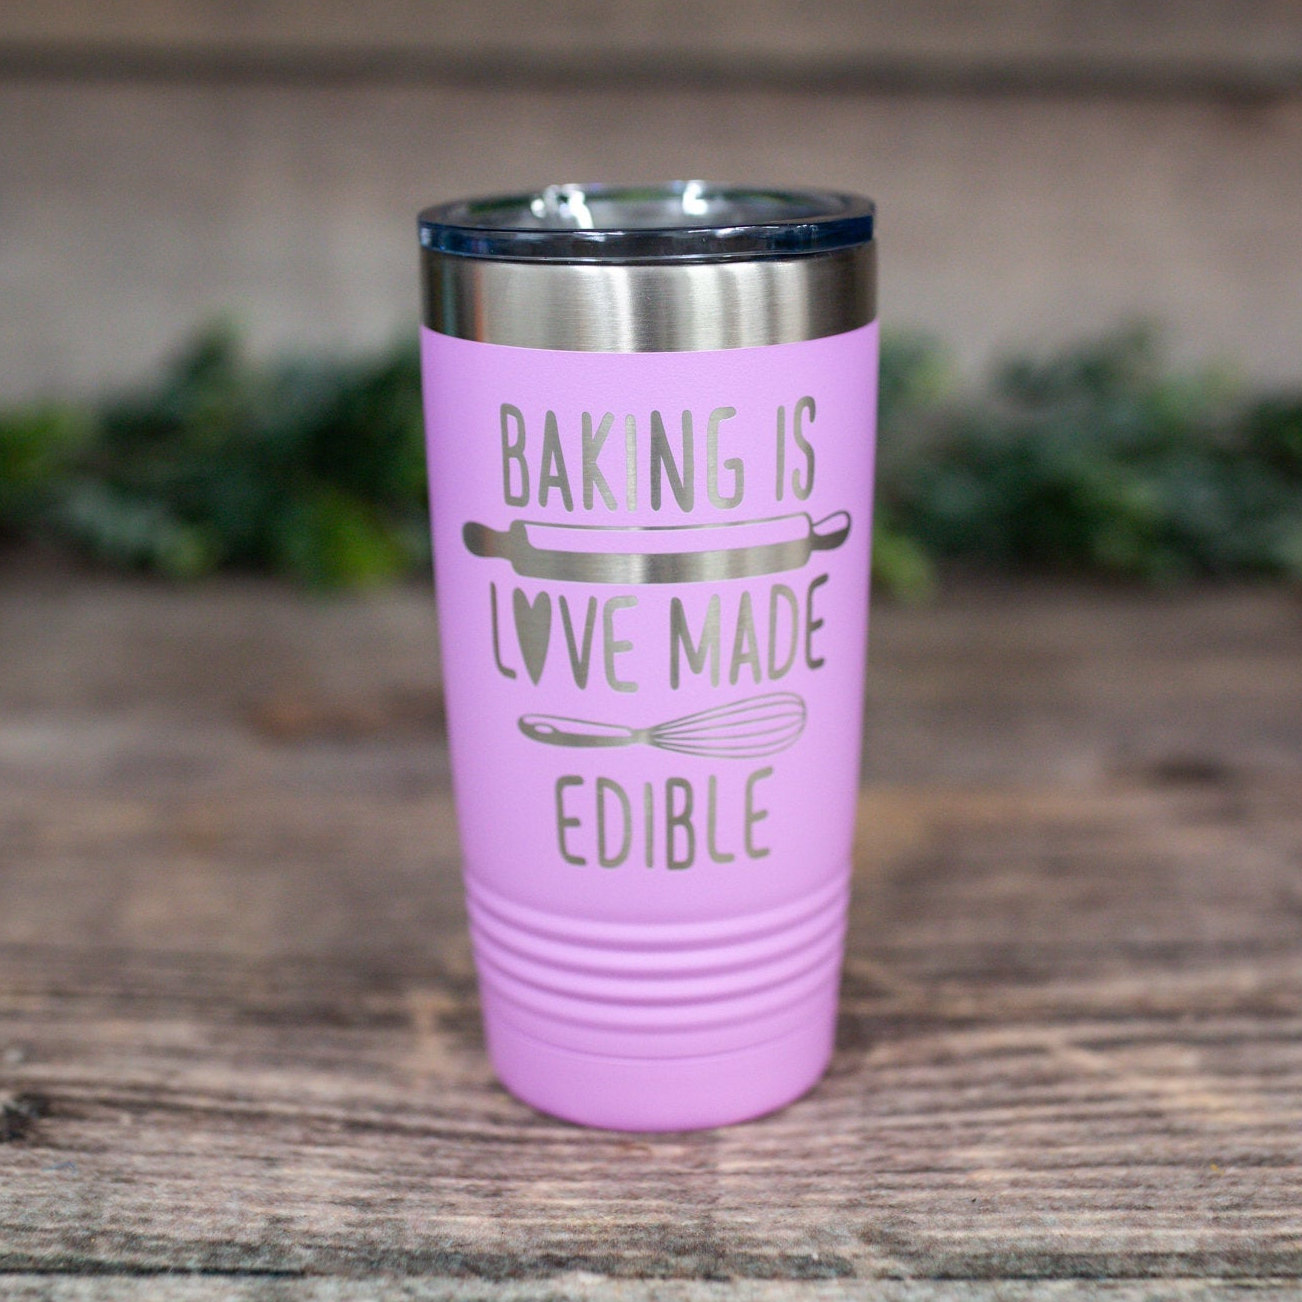 https://3cetching.com/wp-content/uploads/2021/07/baking-is-love-made-edible-engraved-tumbler-for-her-baking-gift-for-her-baking-love-mug-60f7a05e.jpg